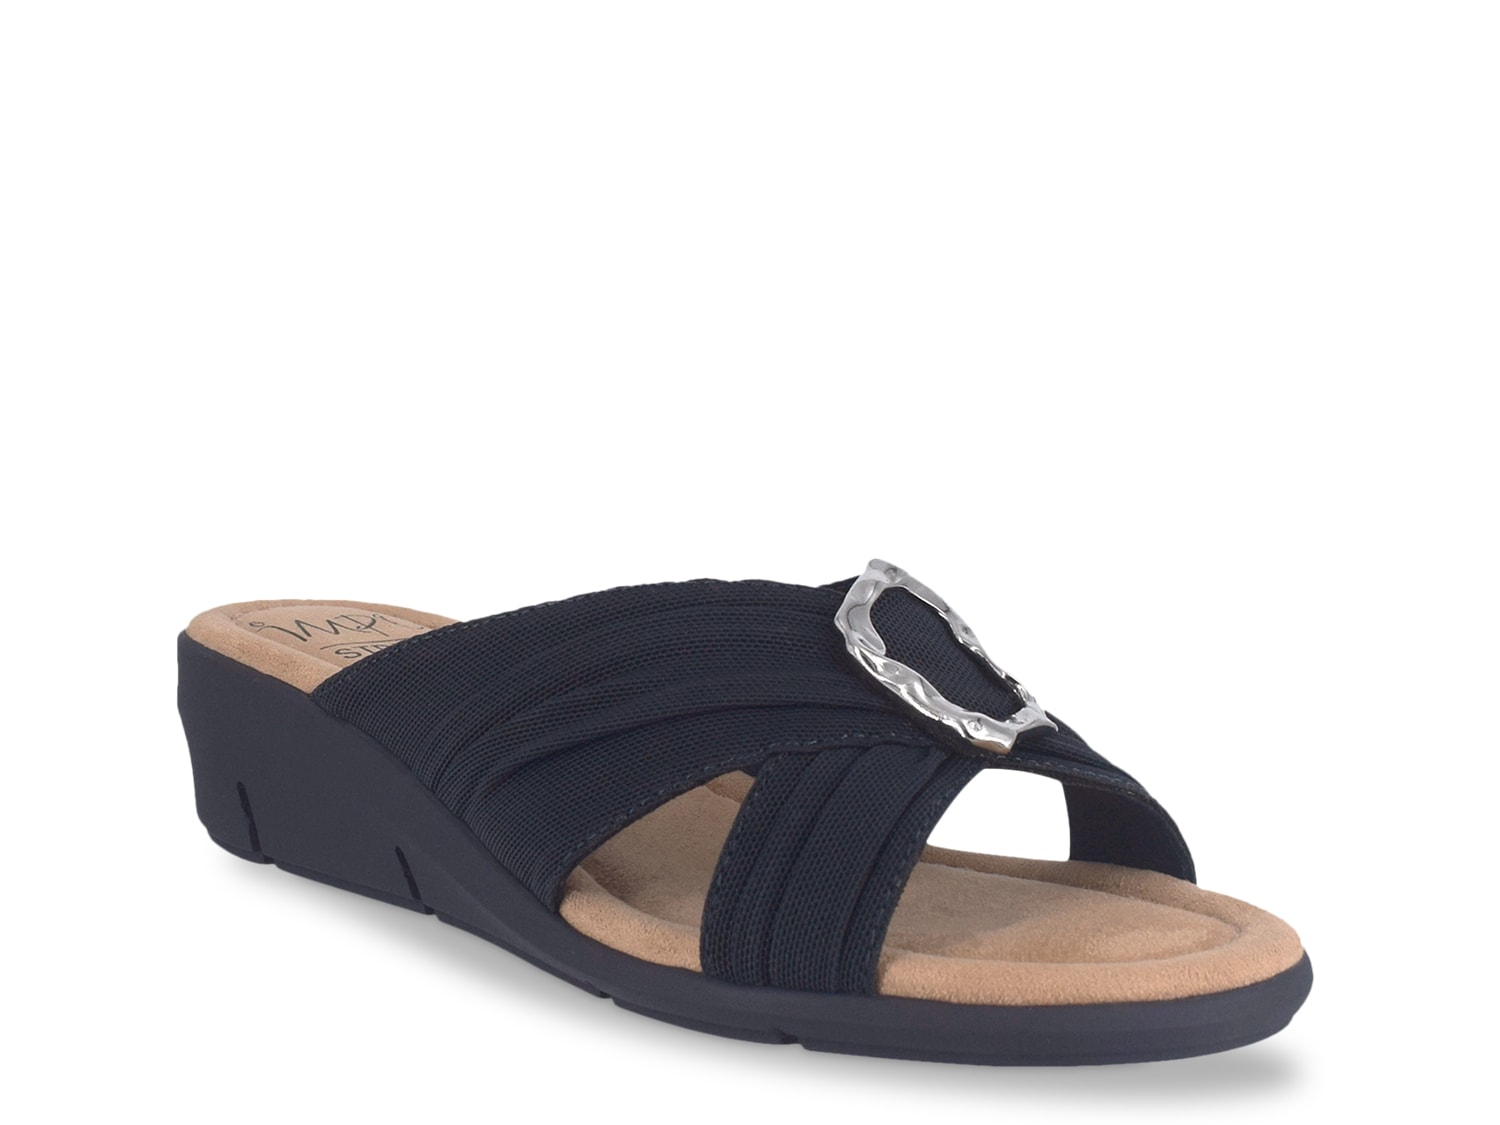 Impo Garith Wedge Sandal - Free Shipping | DSW